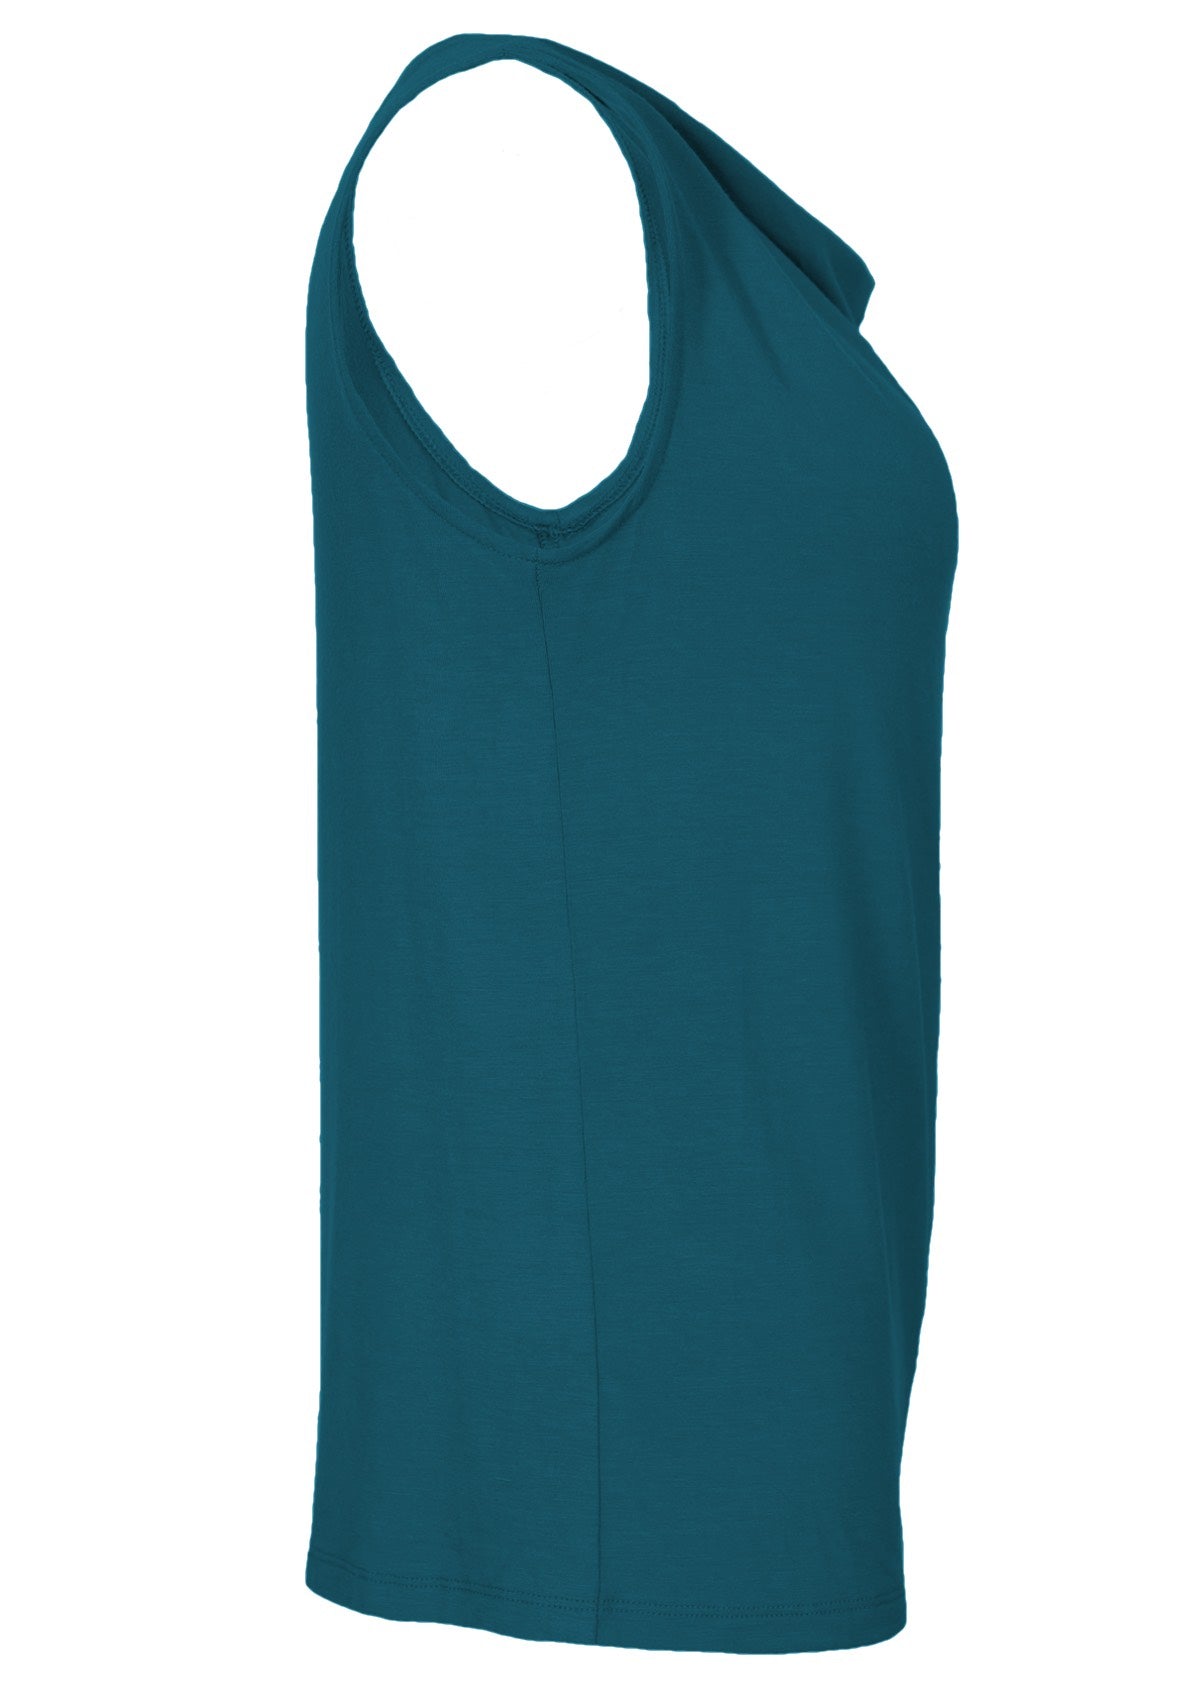 side view soft stretch rayon sleeveless women's top